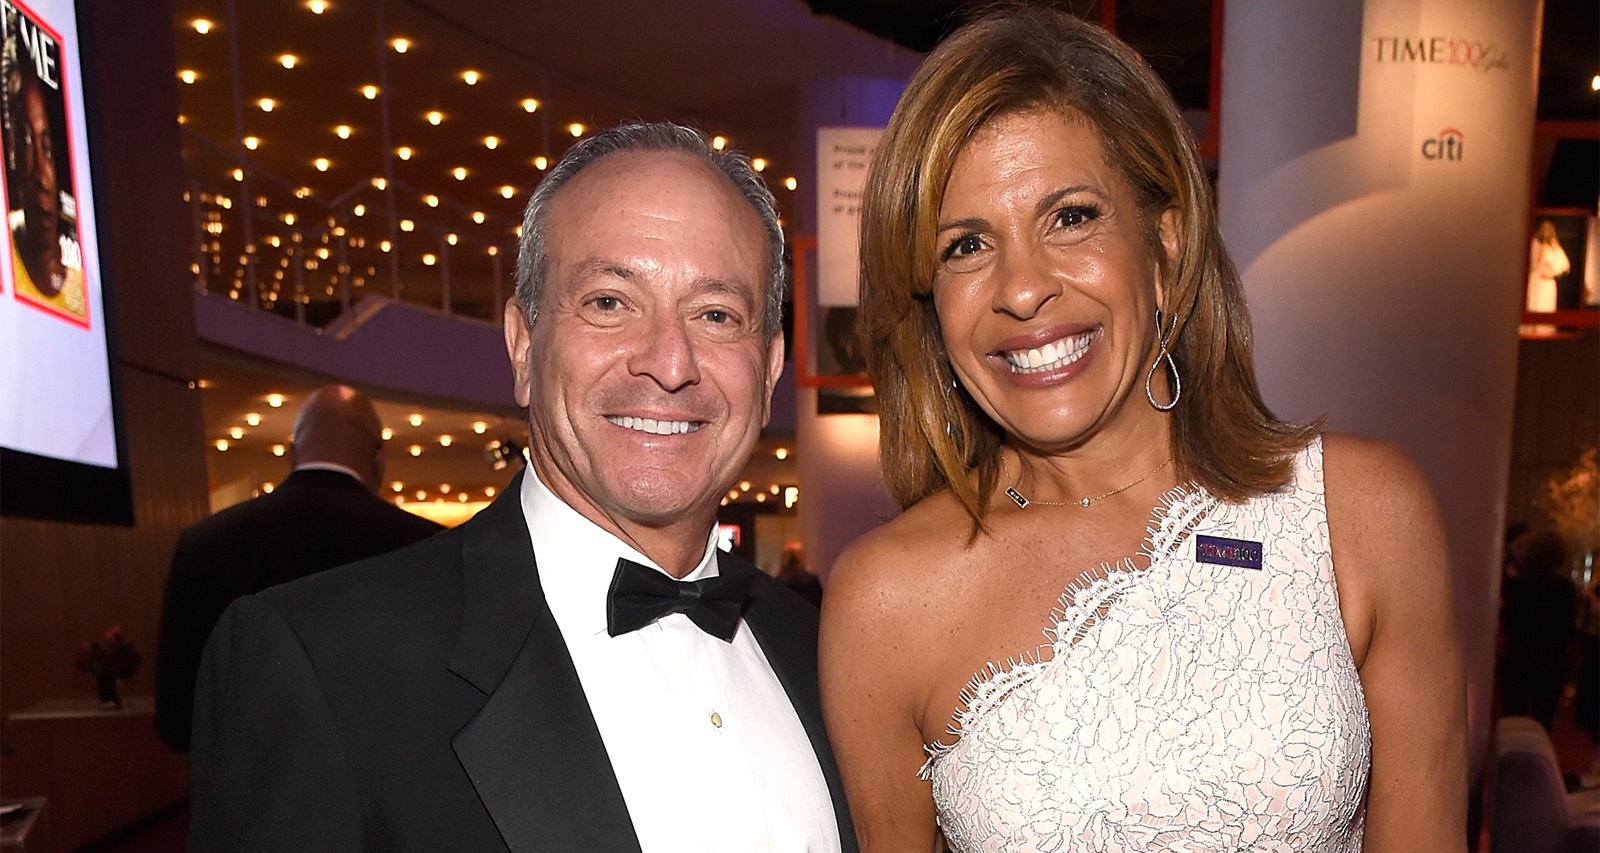 Who is Joel Schiffman, Wiki, Age, Career and Facts About Hoda Kotb’s Fiance